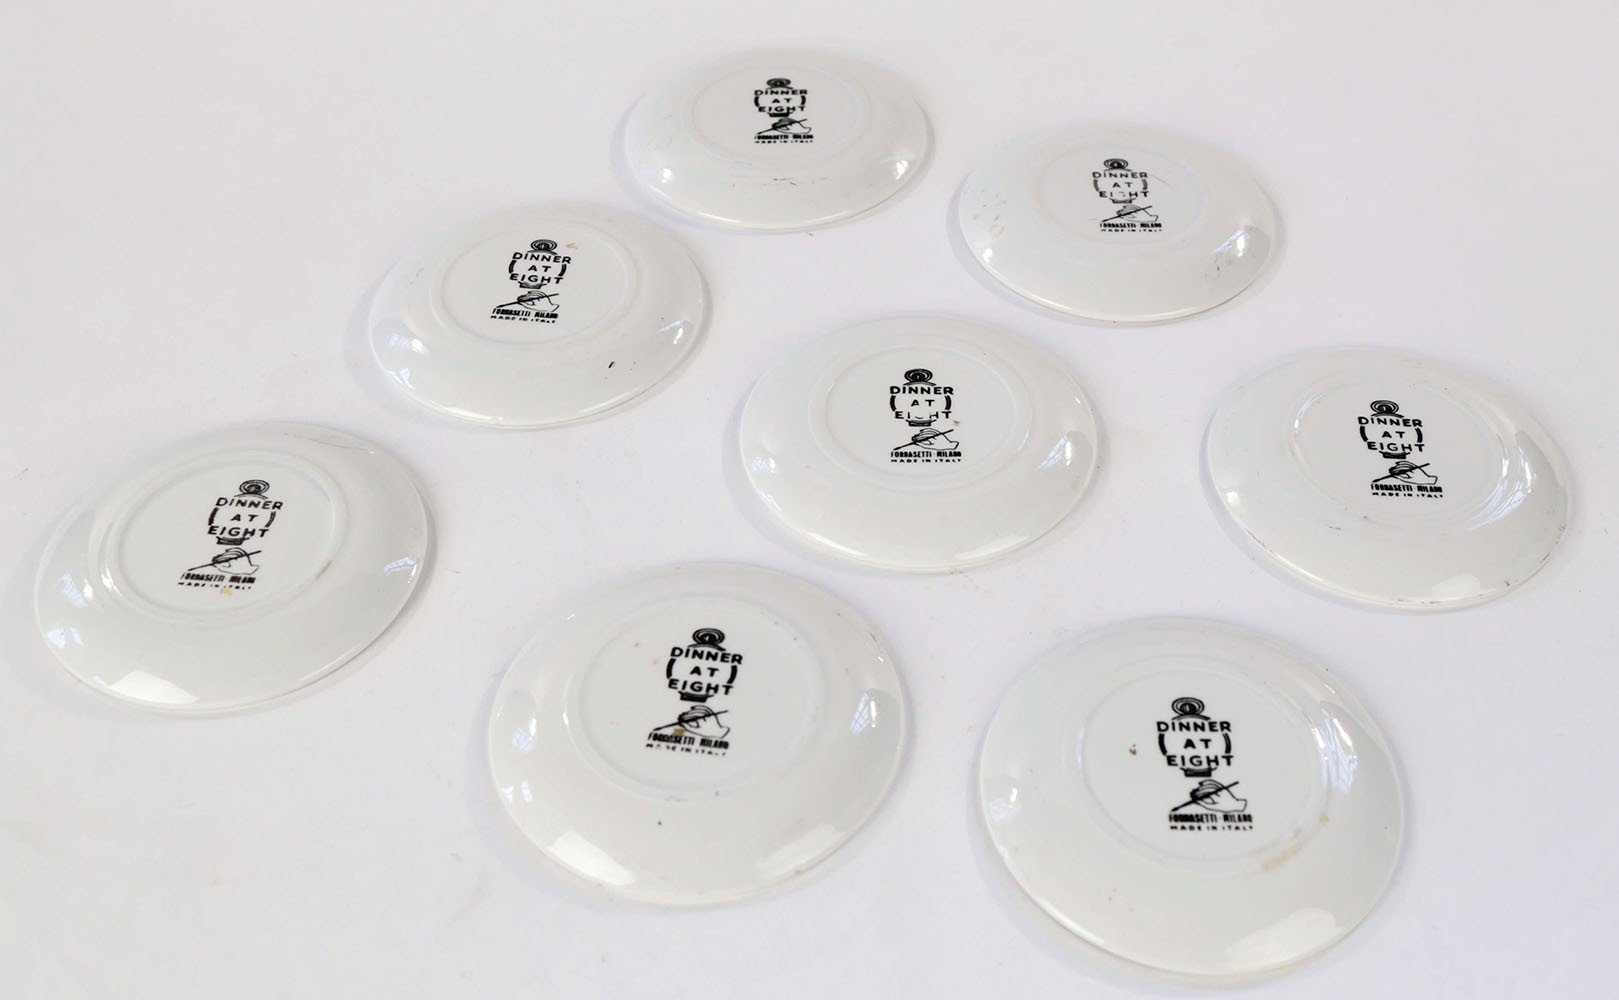 Set of Eight Fornasetti Coasters, Dinner At Eight, or Pranzo alle Otto